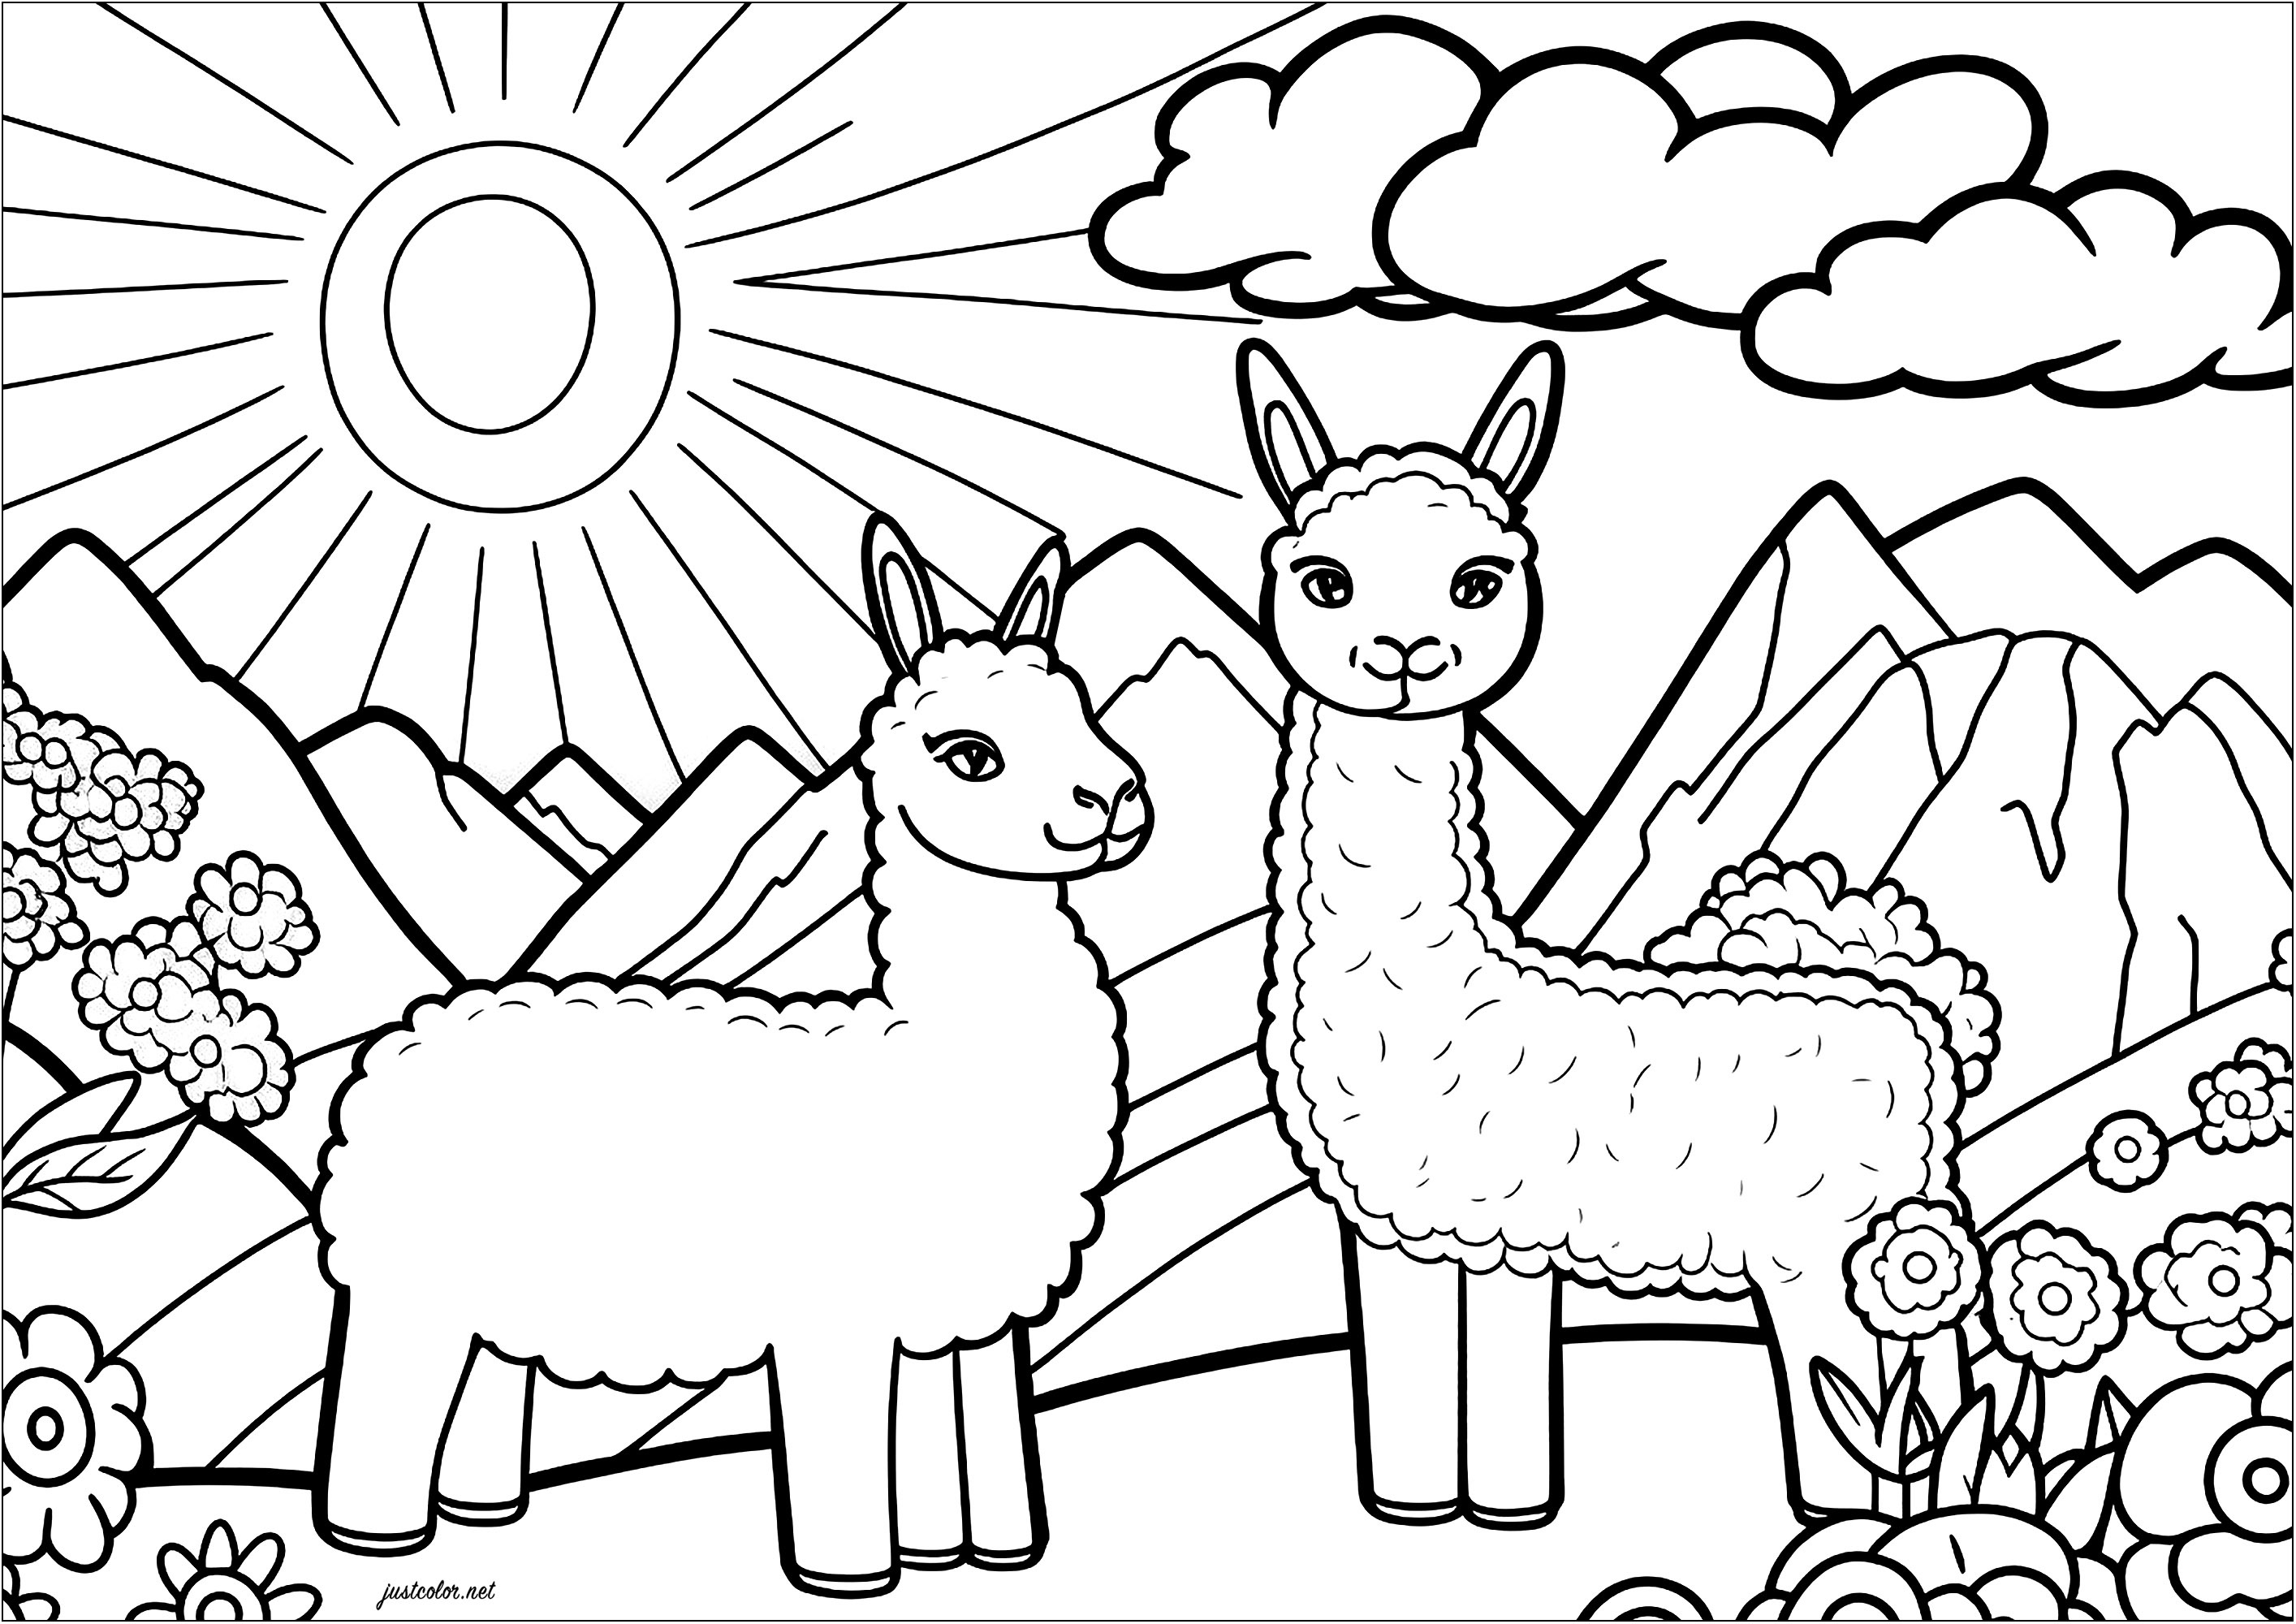 Coloring of two funny llamas. Two funny llamas having fun in a mountainous landscape. In the background, a big sun and some clouds.
